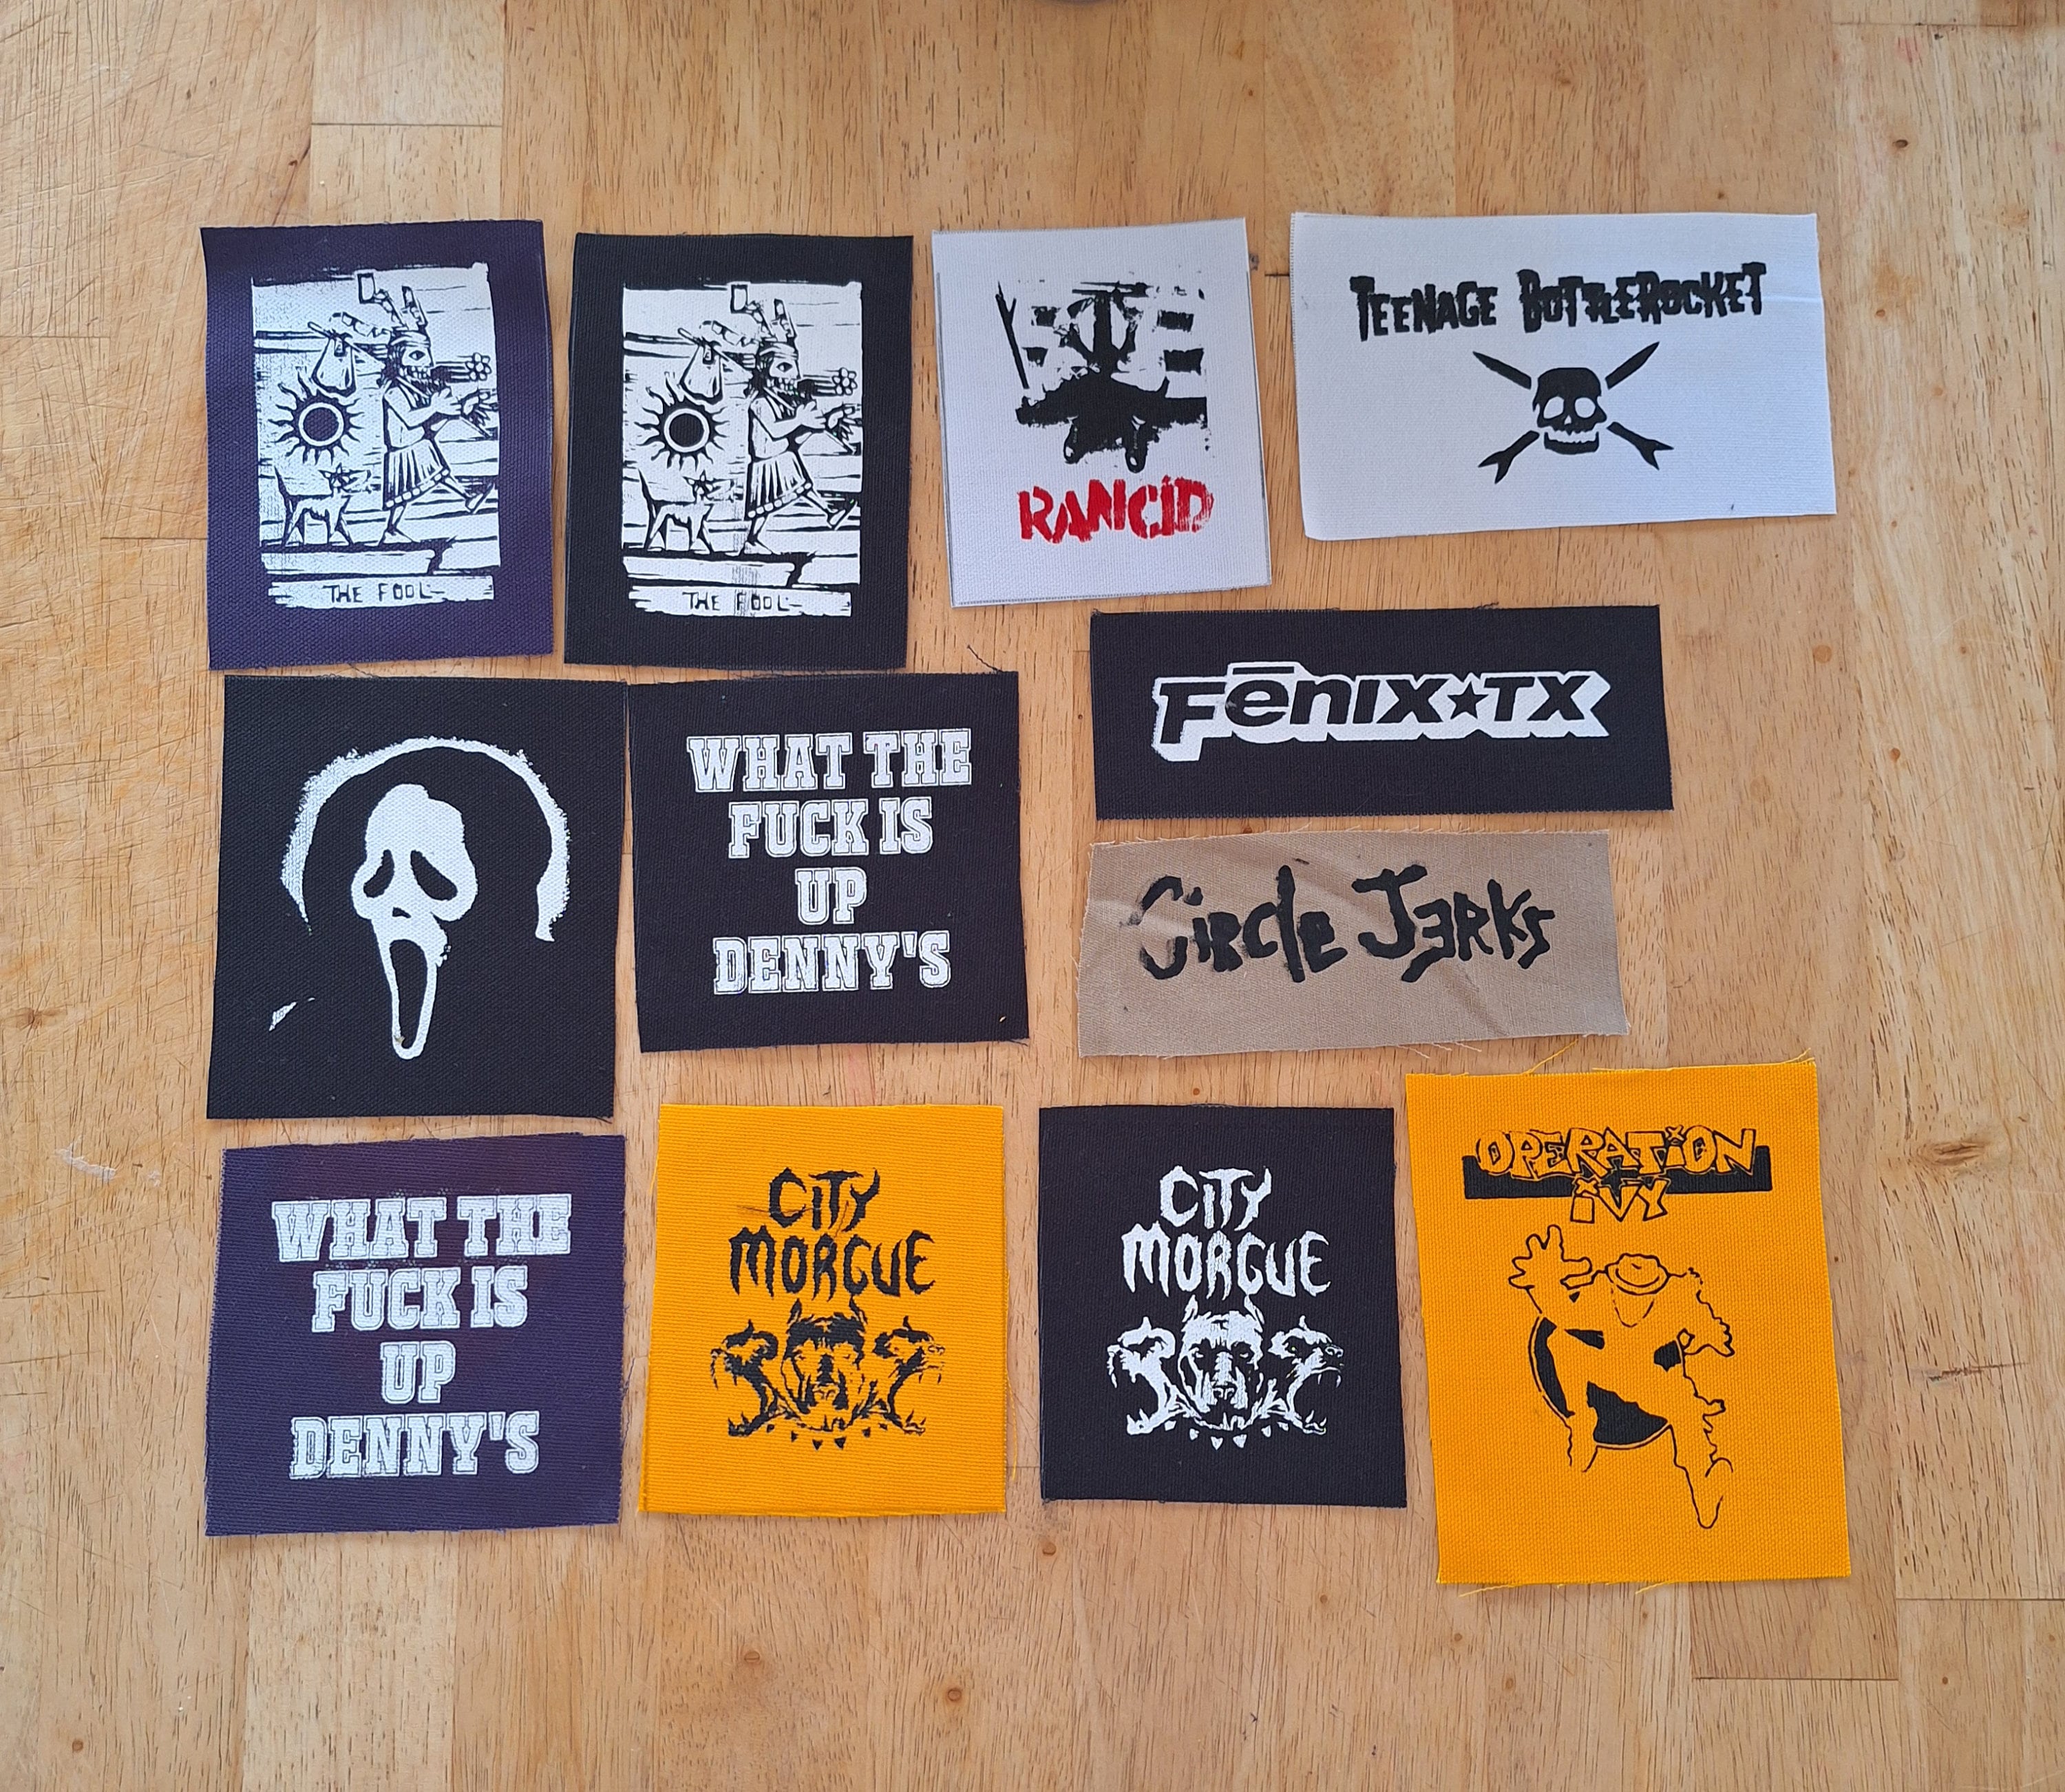 band patches \m/  Hair metal bands, Punk fashion diy, Band patches